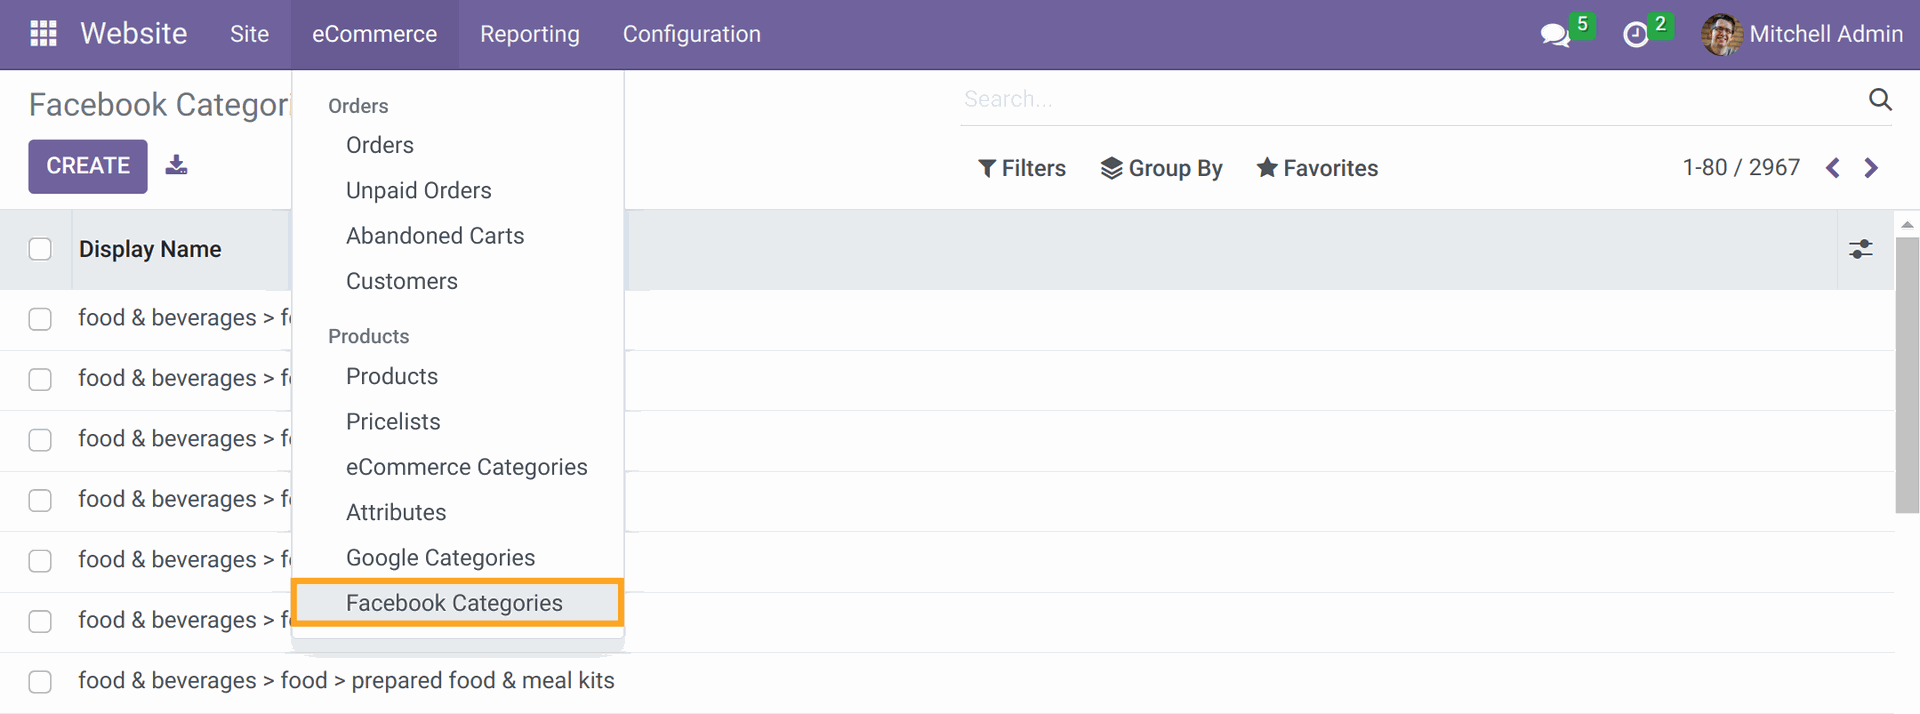 Odoo 16.0 Facebook Product Category list